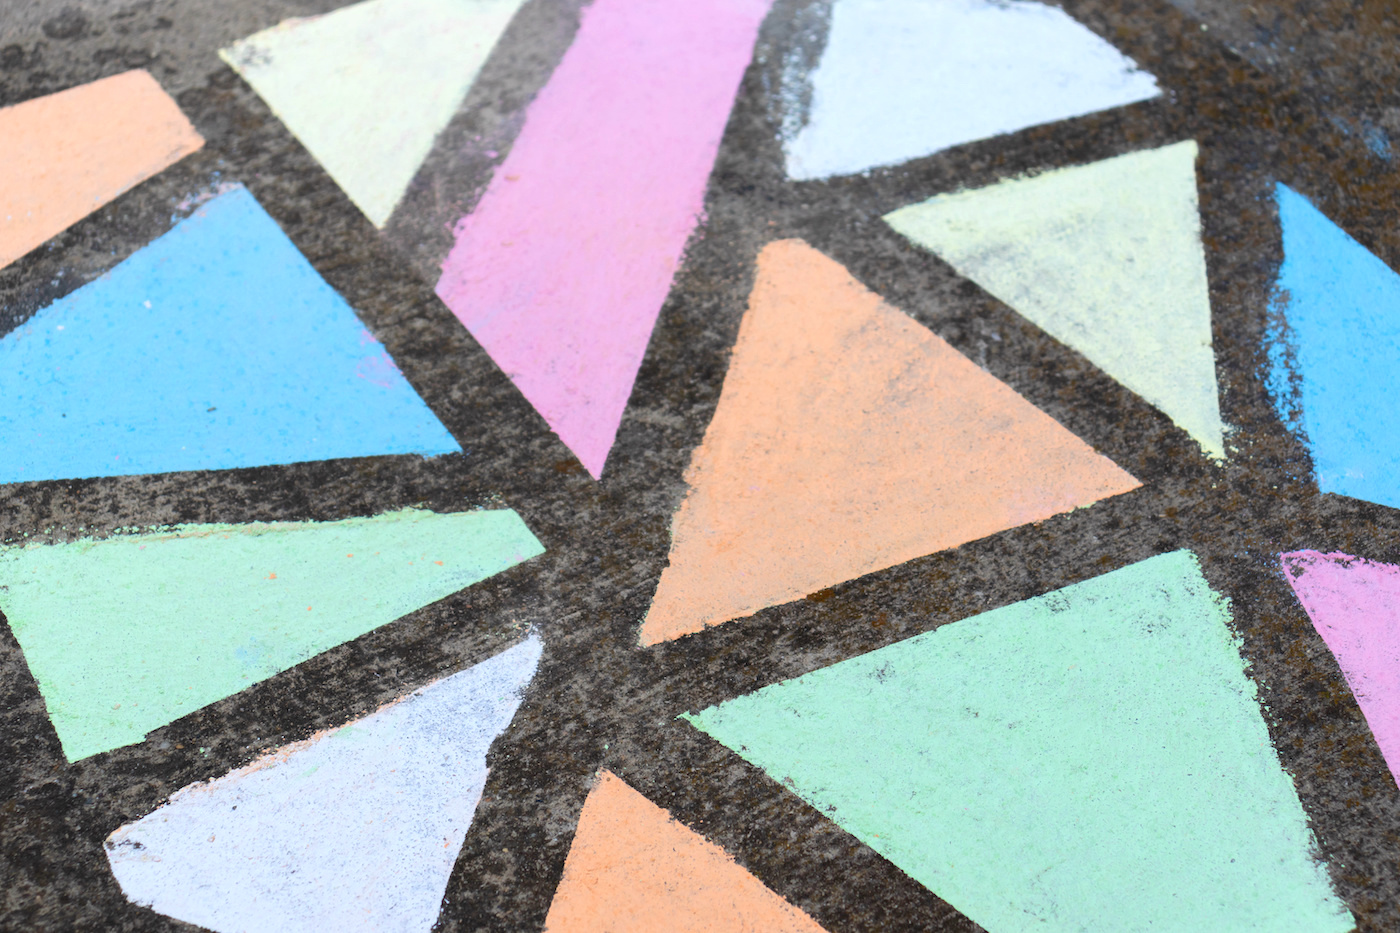 Triangles painted with sidewalk paint